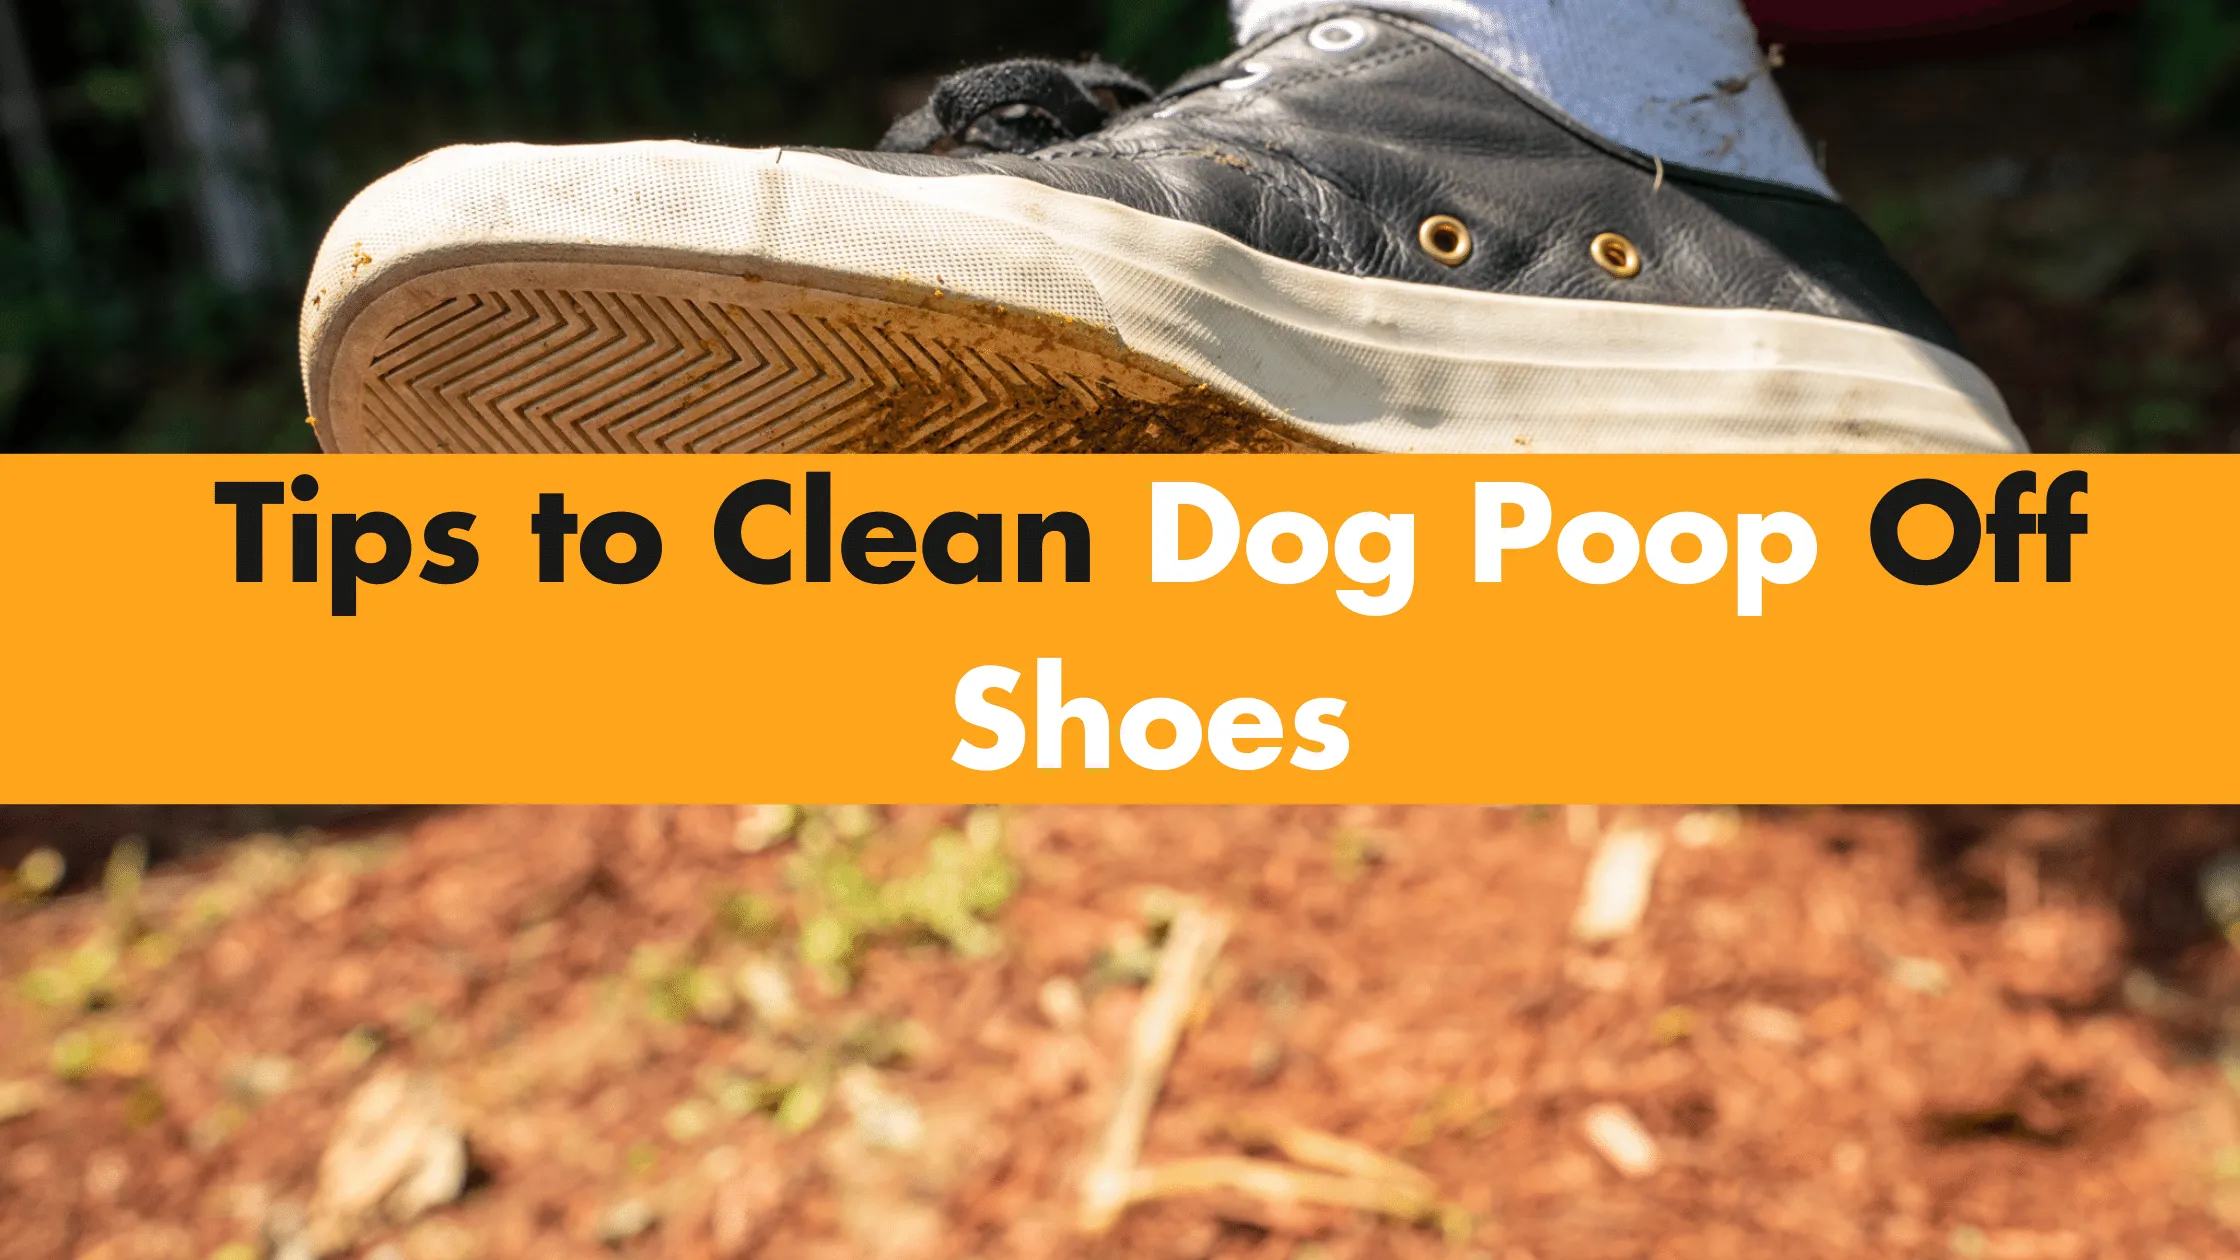 Tips to Clean Dog Poop Off Shoes